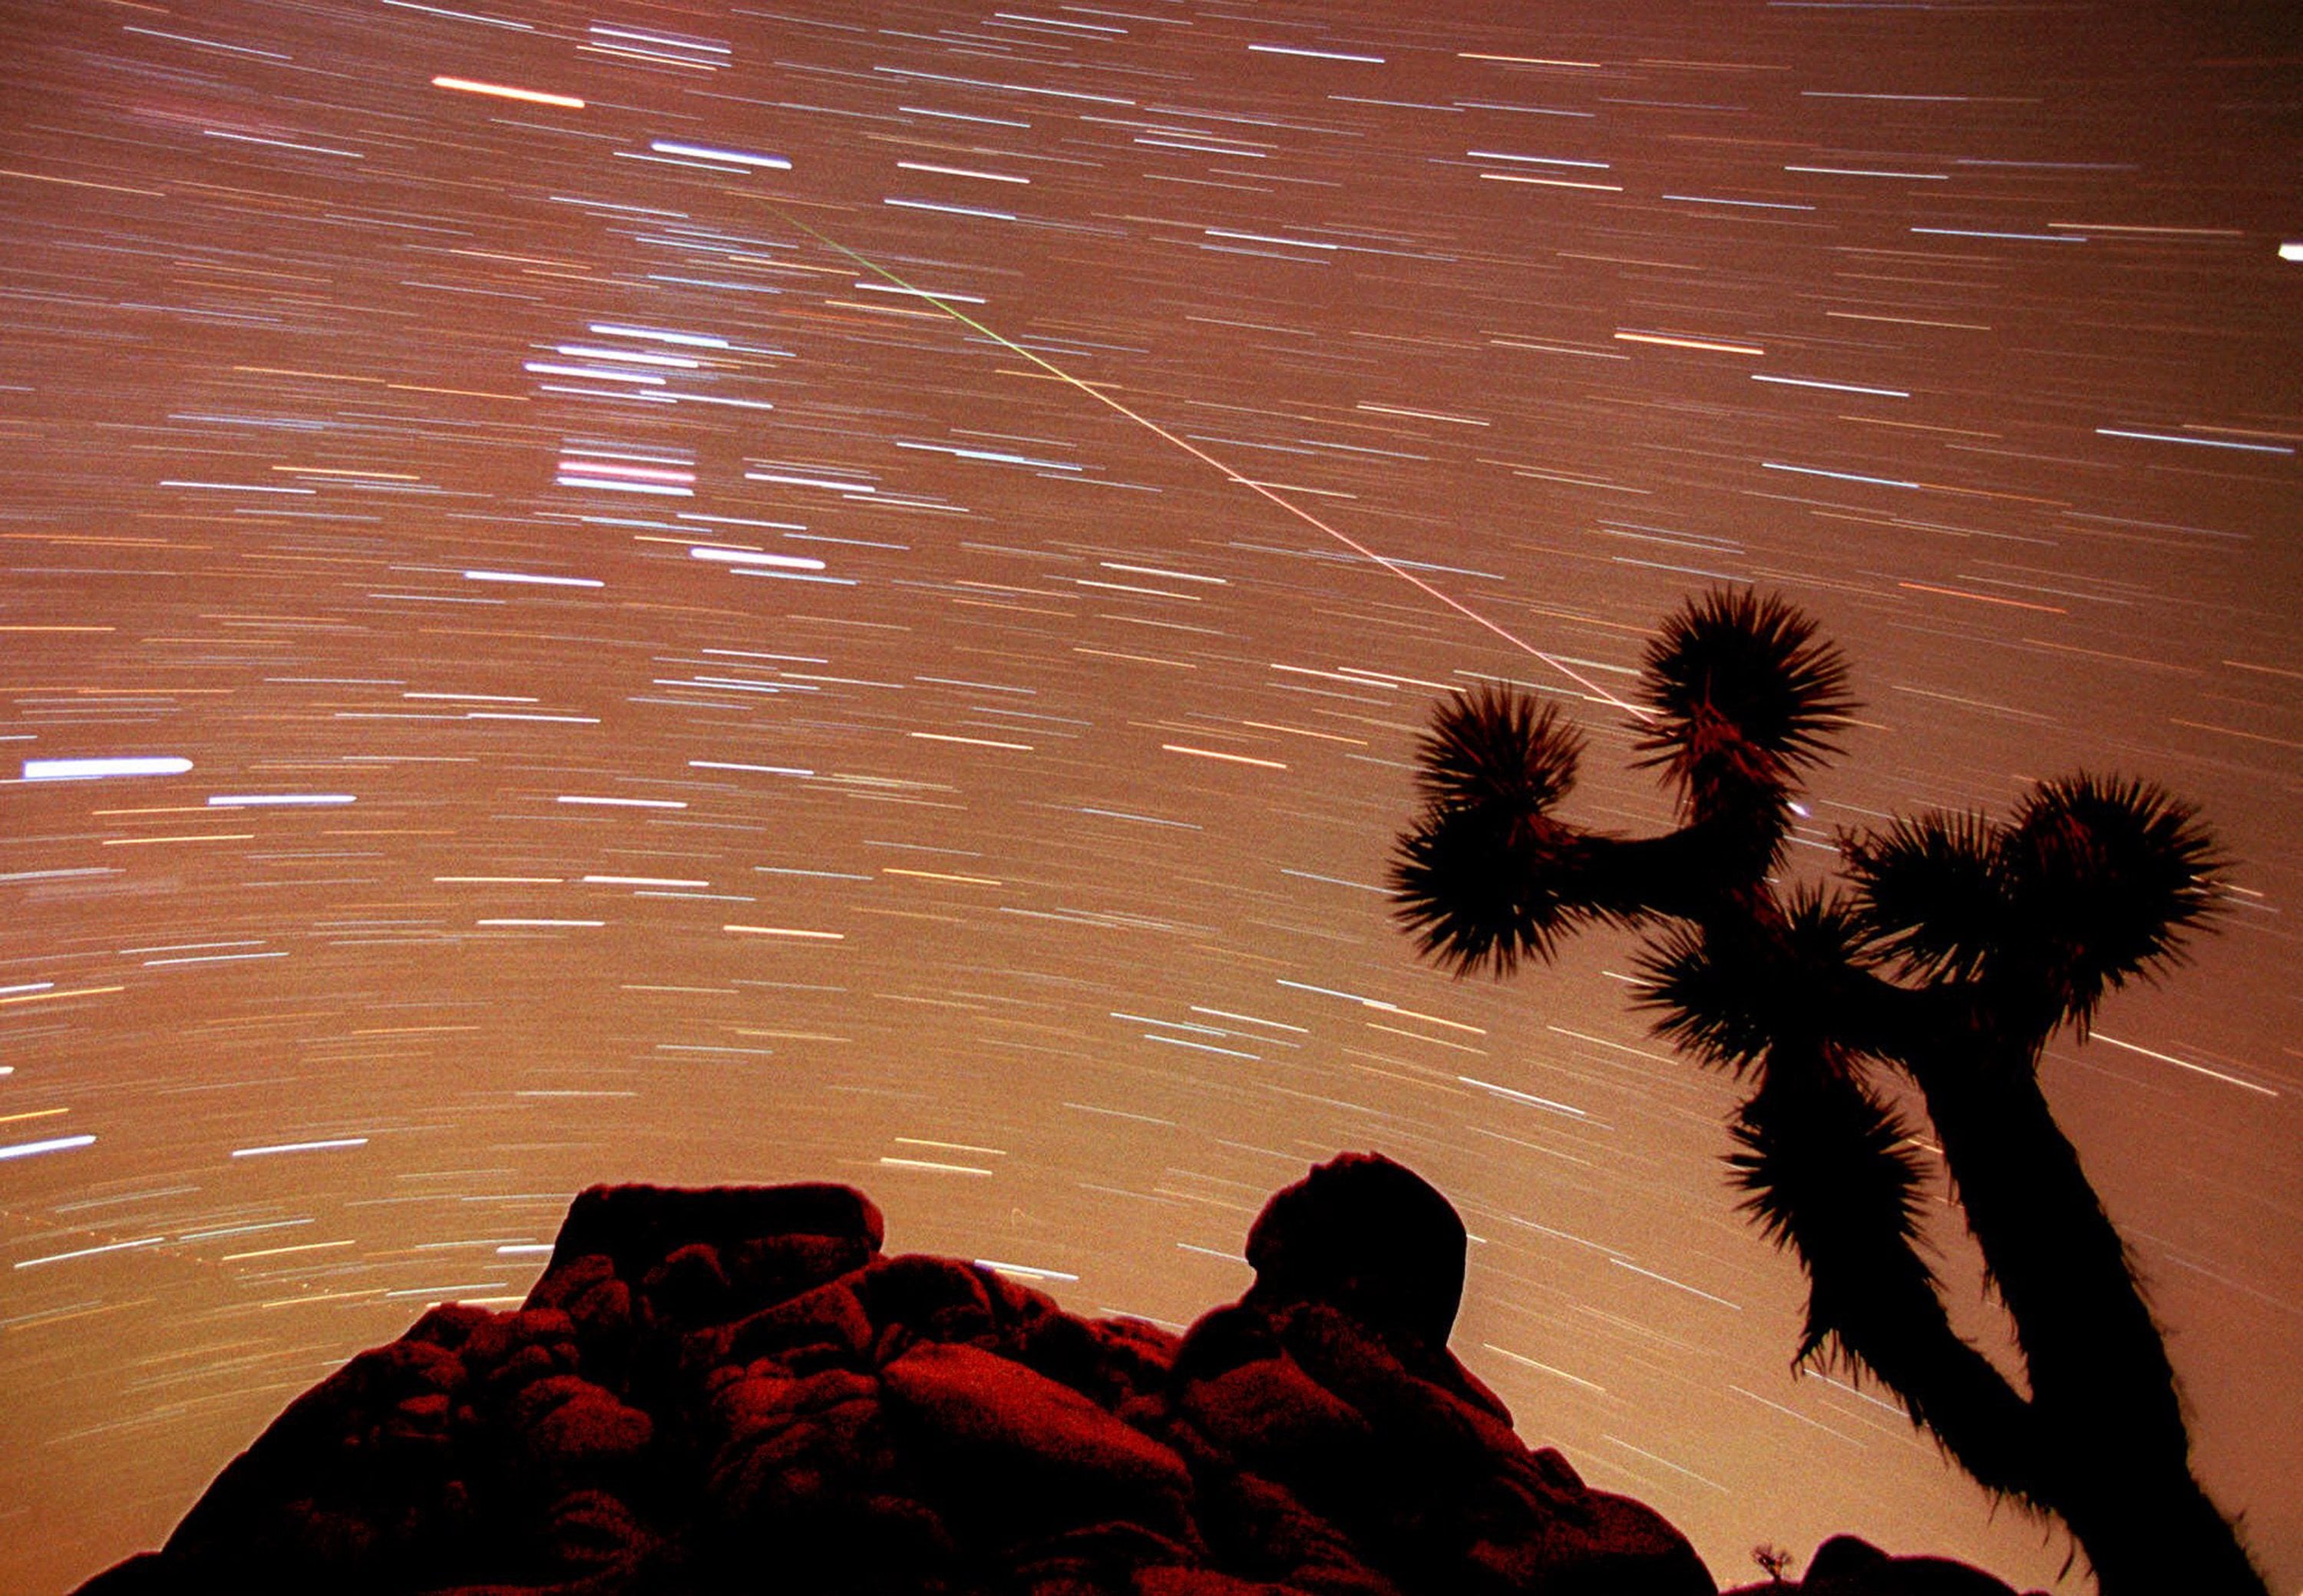 A meteor streaks through the sky over Joshua trees and rocks at Joshua Tree National Monument in Southern California&#039;s Mojave Desert. President Barack Obama is granting national monument status to nearly 1.8 million acres of scenic California desert wilderness, including land that would connect what is now Joshua Tree National Park to other established national monuments and national parks in the area. Obama, in California this week for a fund-raising swing, plan to make the announcement Friday, Feb. 12, 2016.